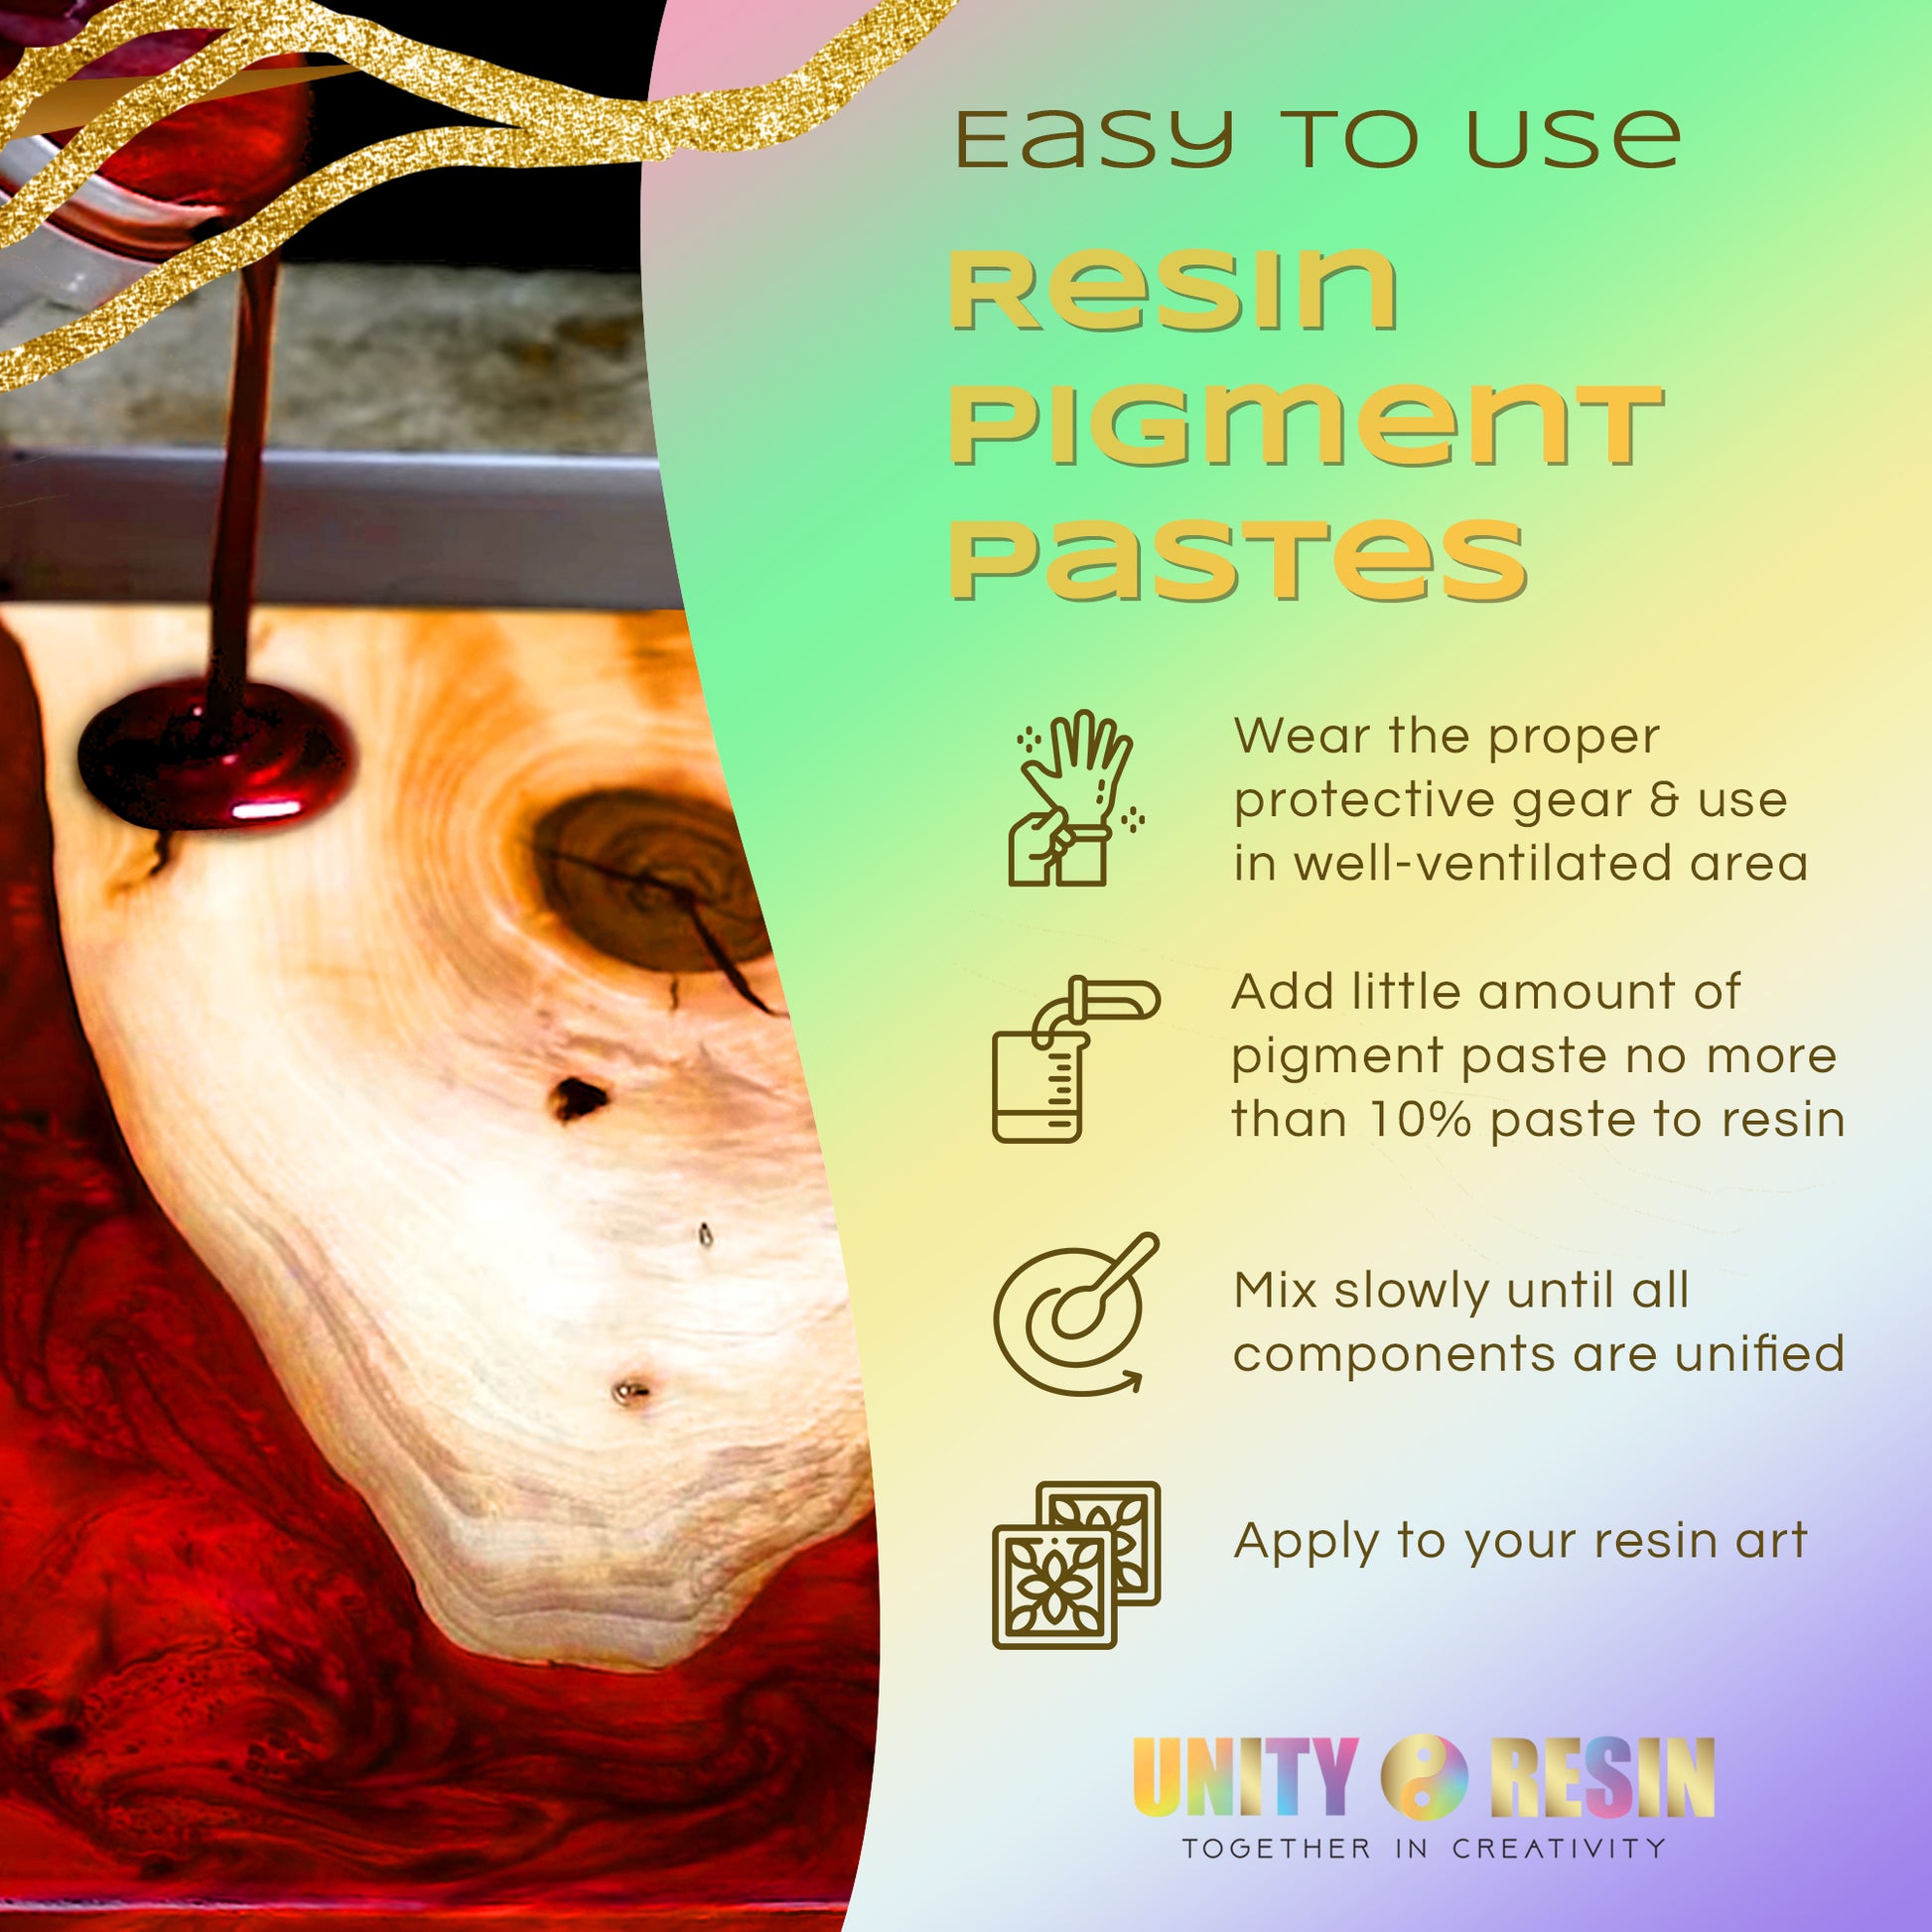 Ultra-Luxe Epoxy Resin Pigment Paste- ROBINS EGG (50G)